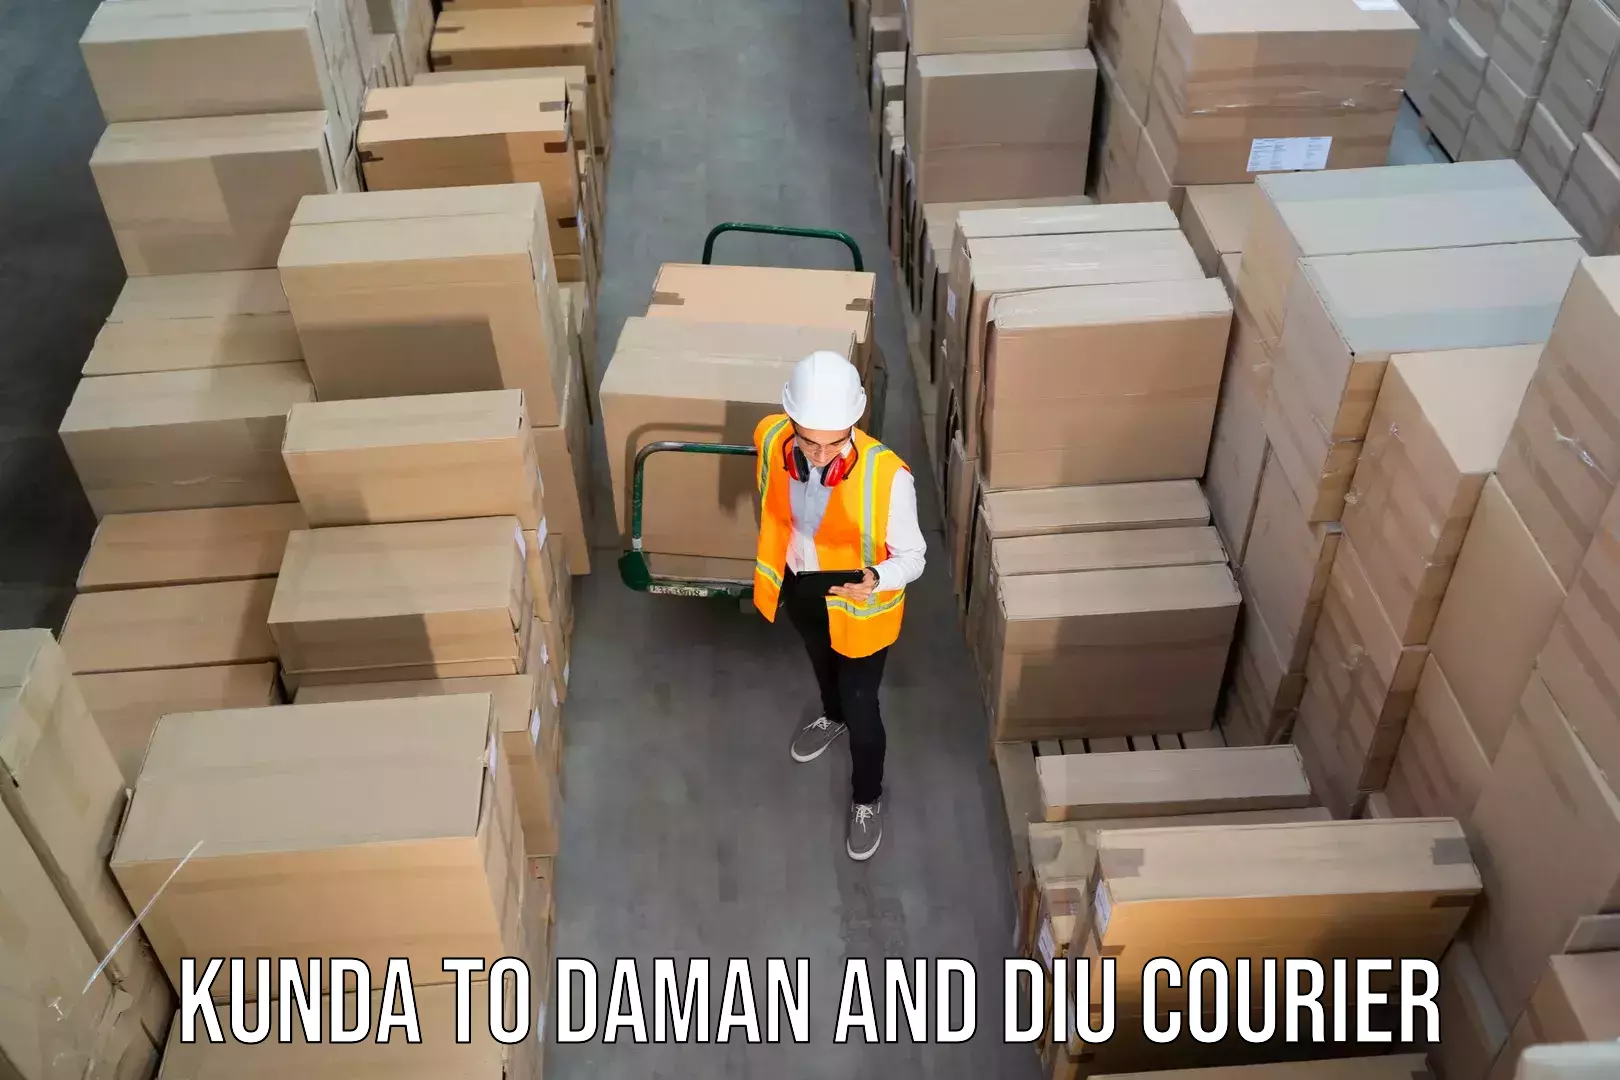 Flexible delivery schedules Kunda to Daman and Diu